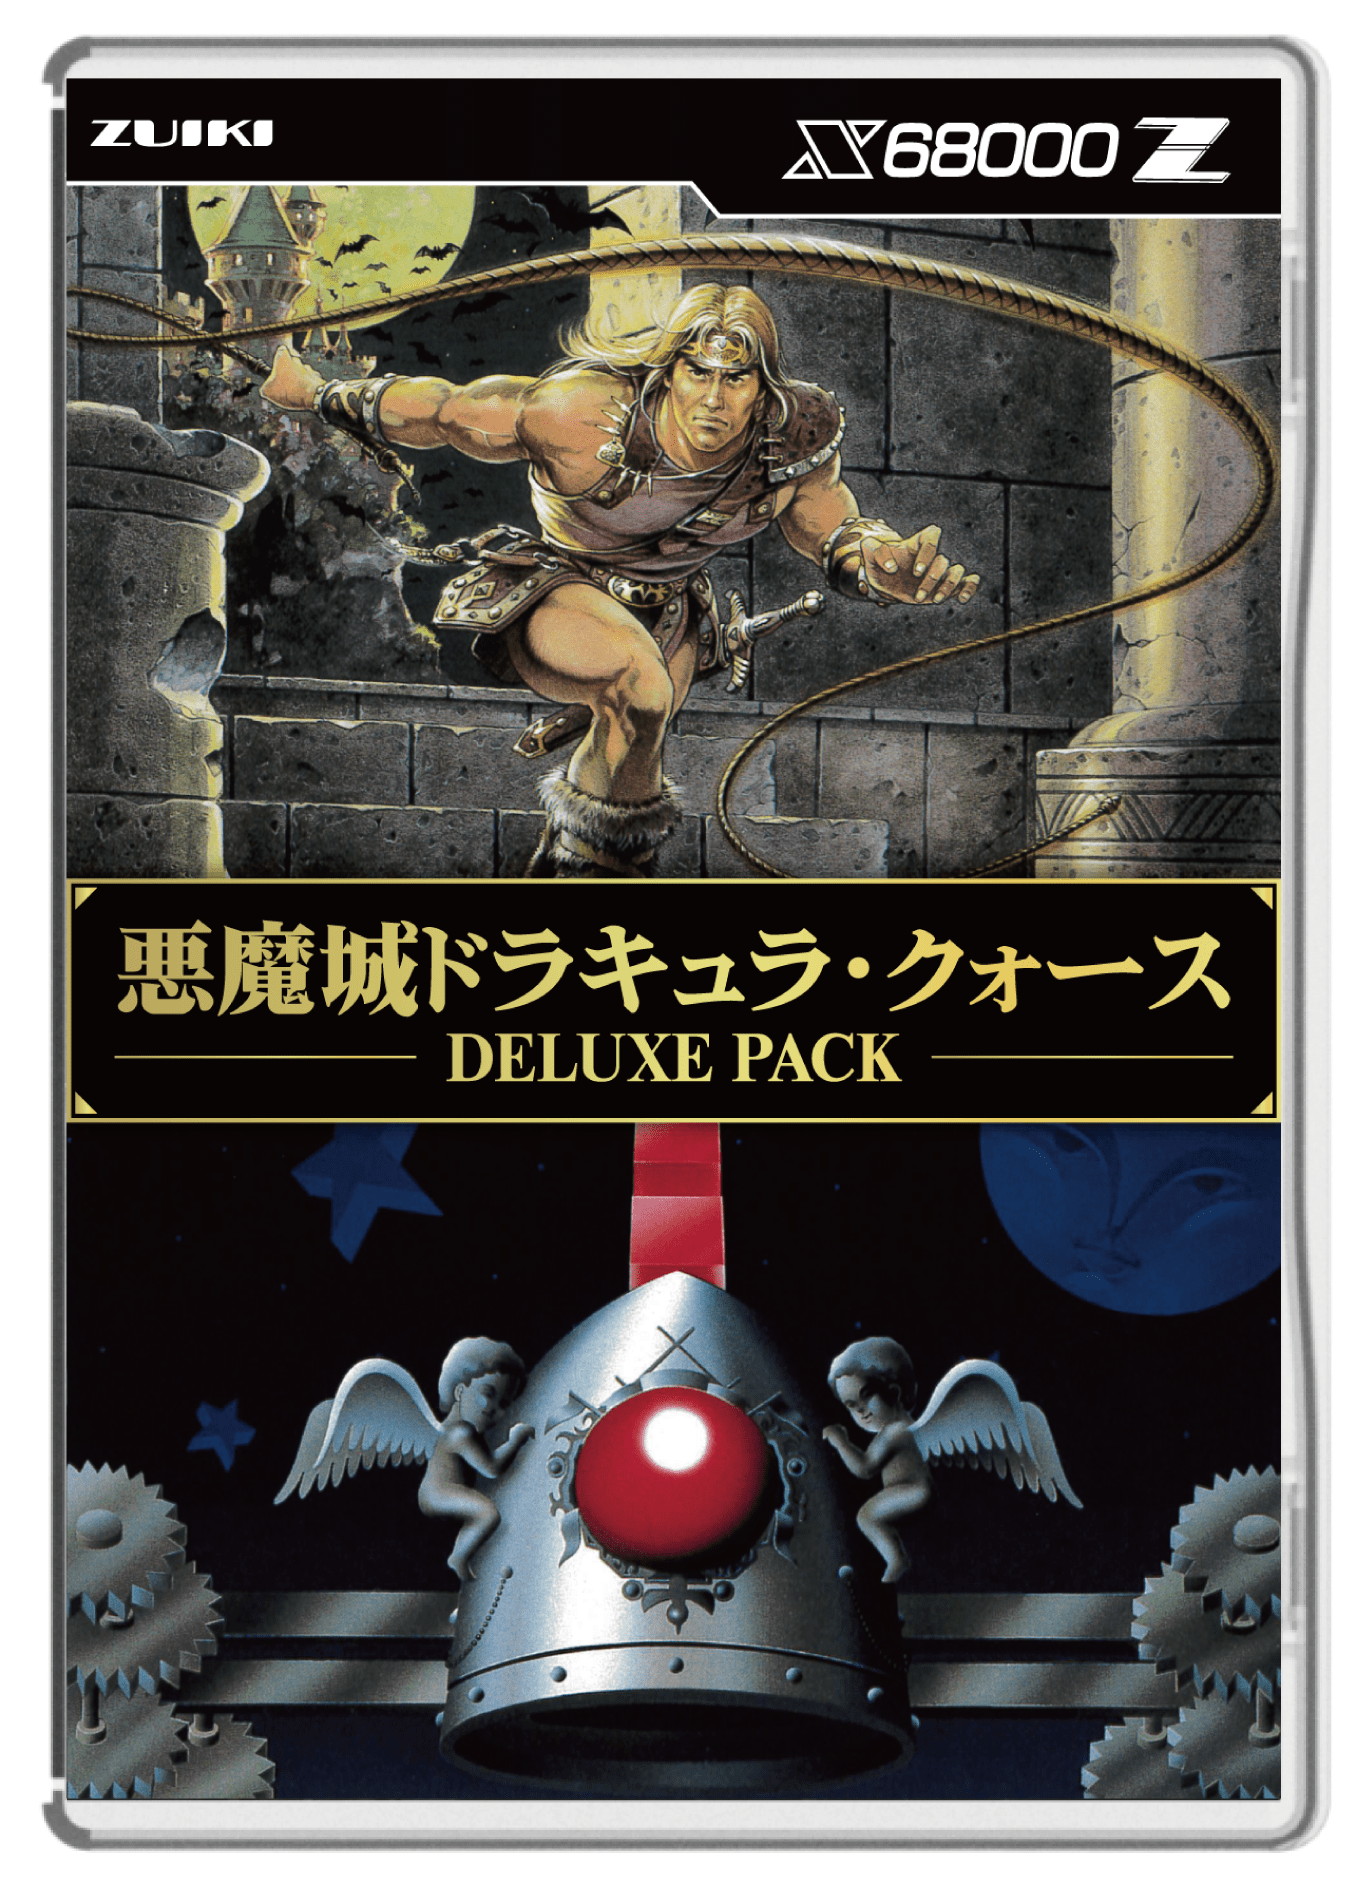 X68000 Z用ソフト「悪魔城ドラキュラ・クォース DELUXE PACK」が発売 